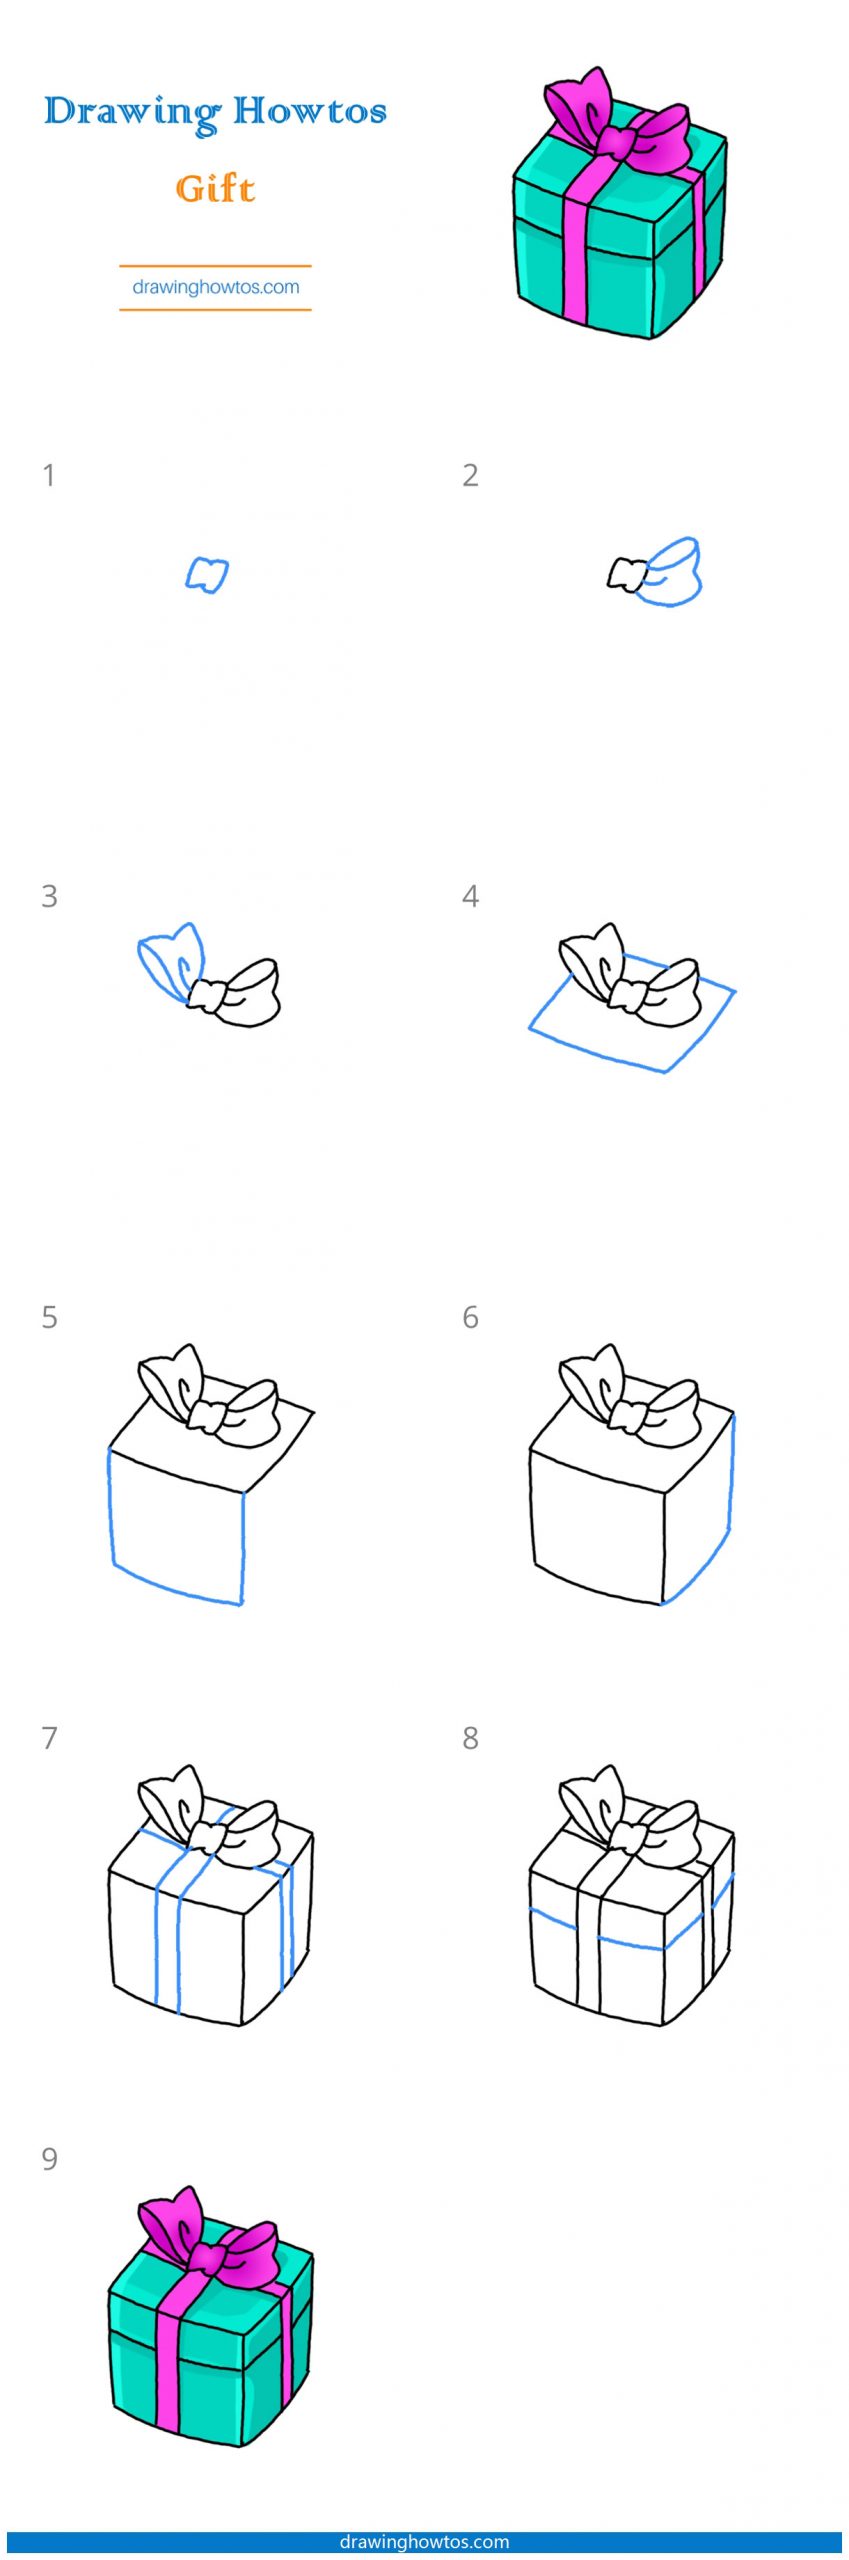 How to Draw a Gift Bag Step by Step